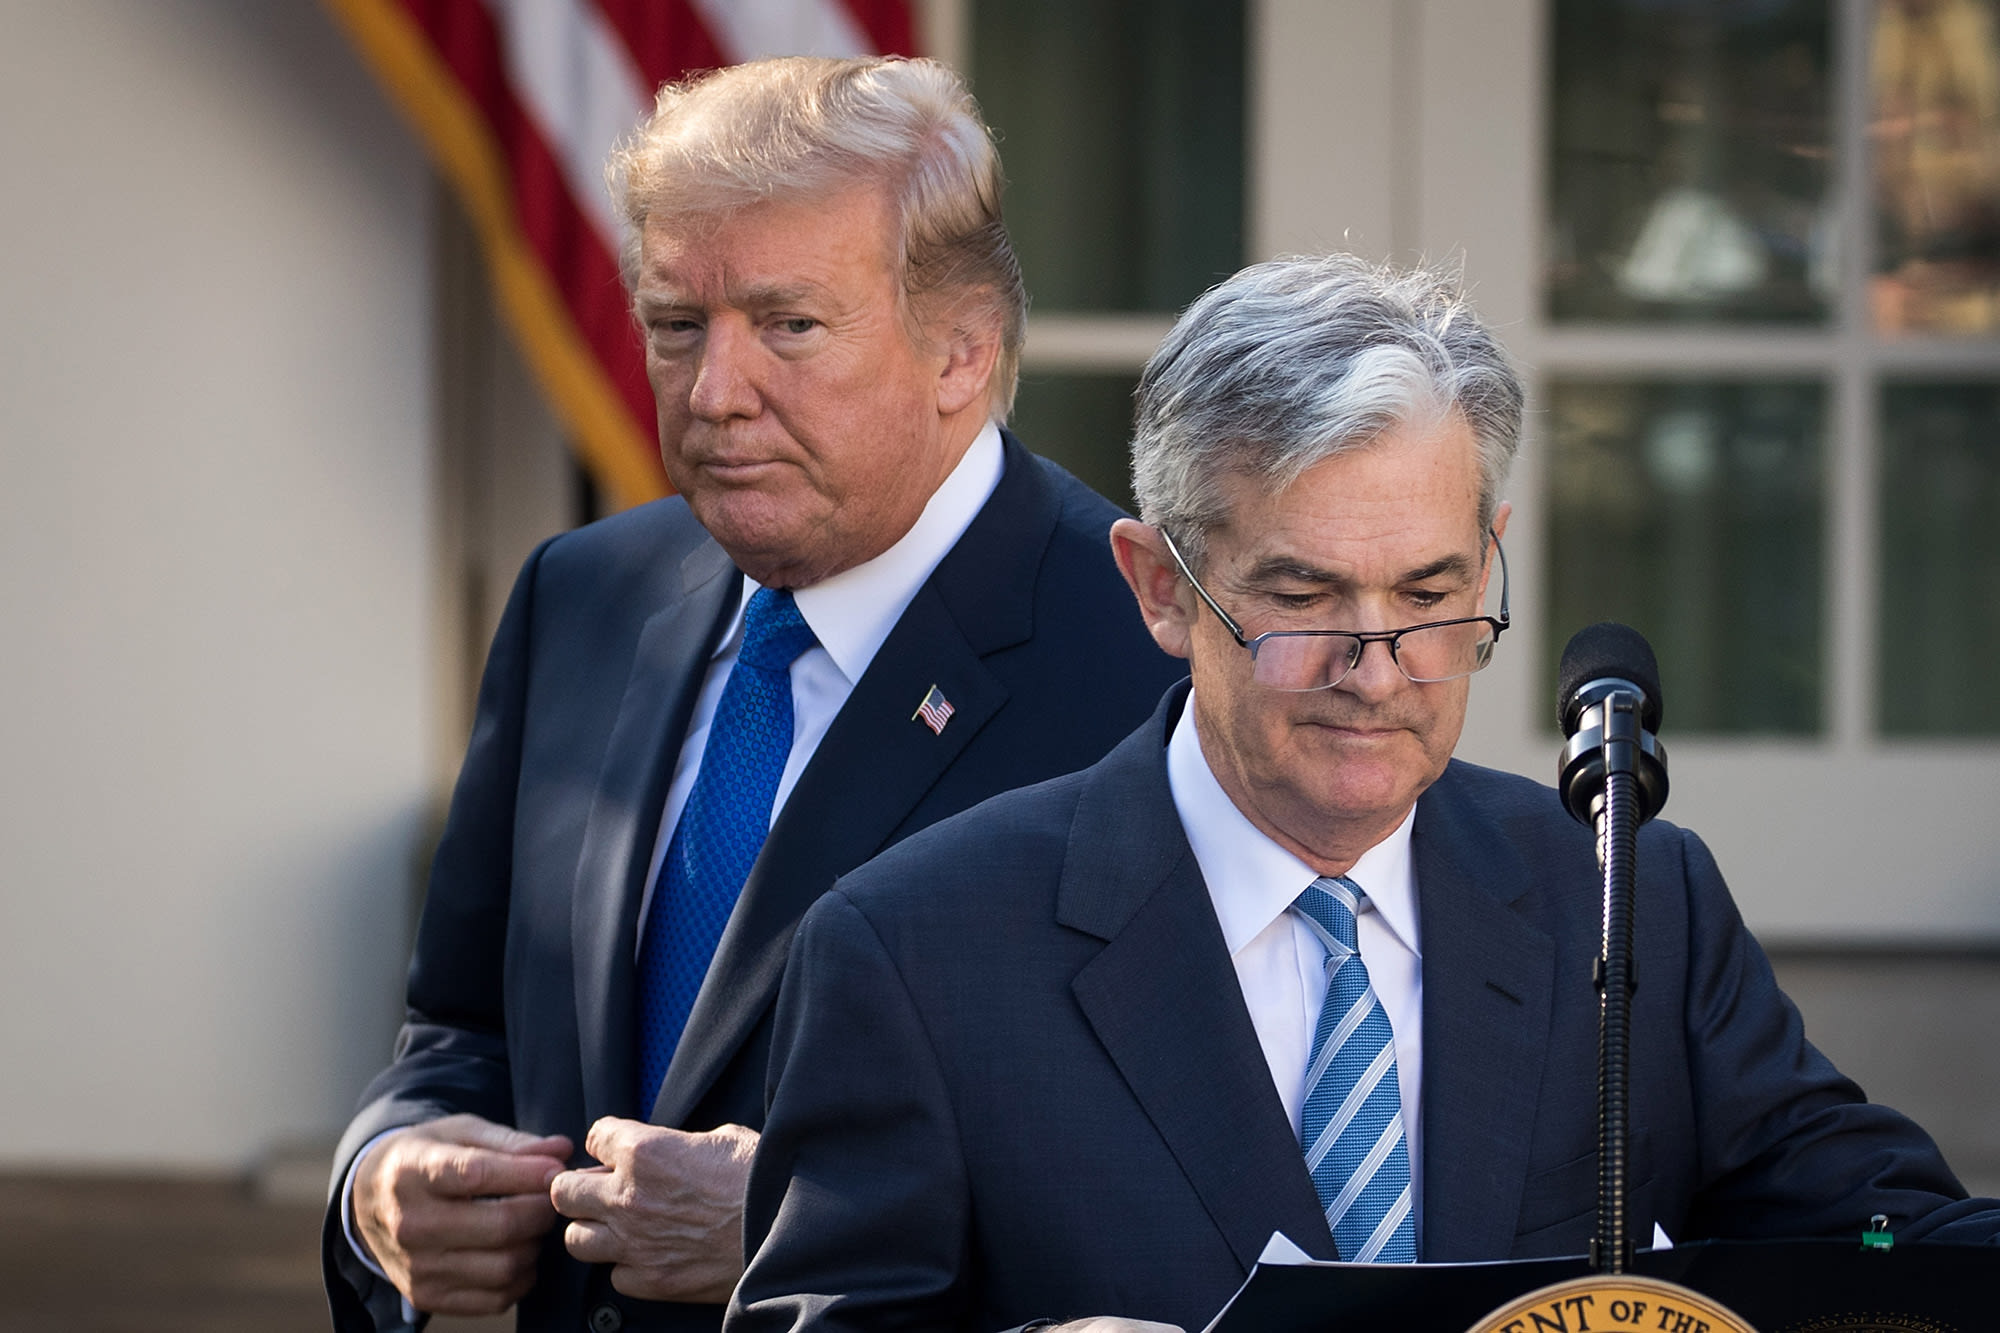 Expect the unexpected from both Powell and Trump